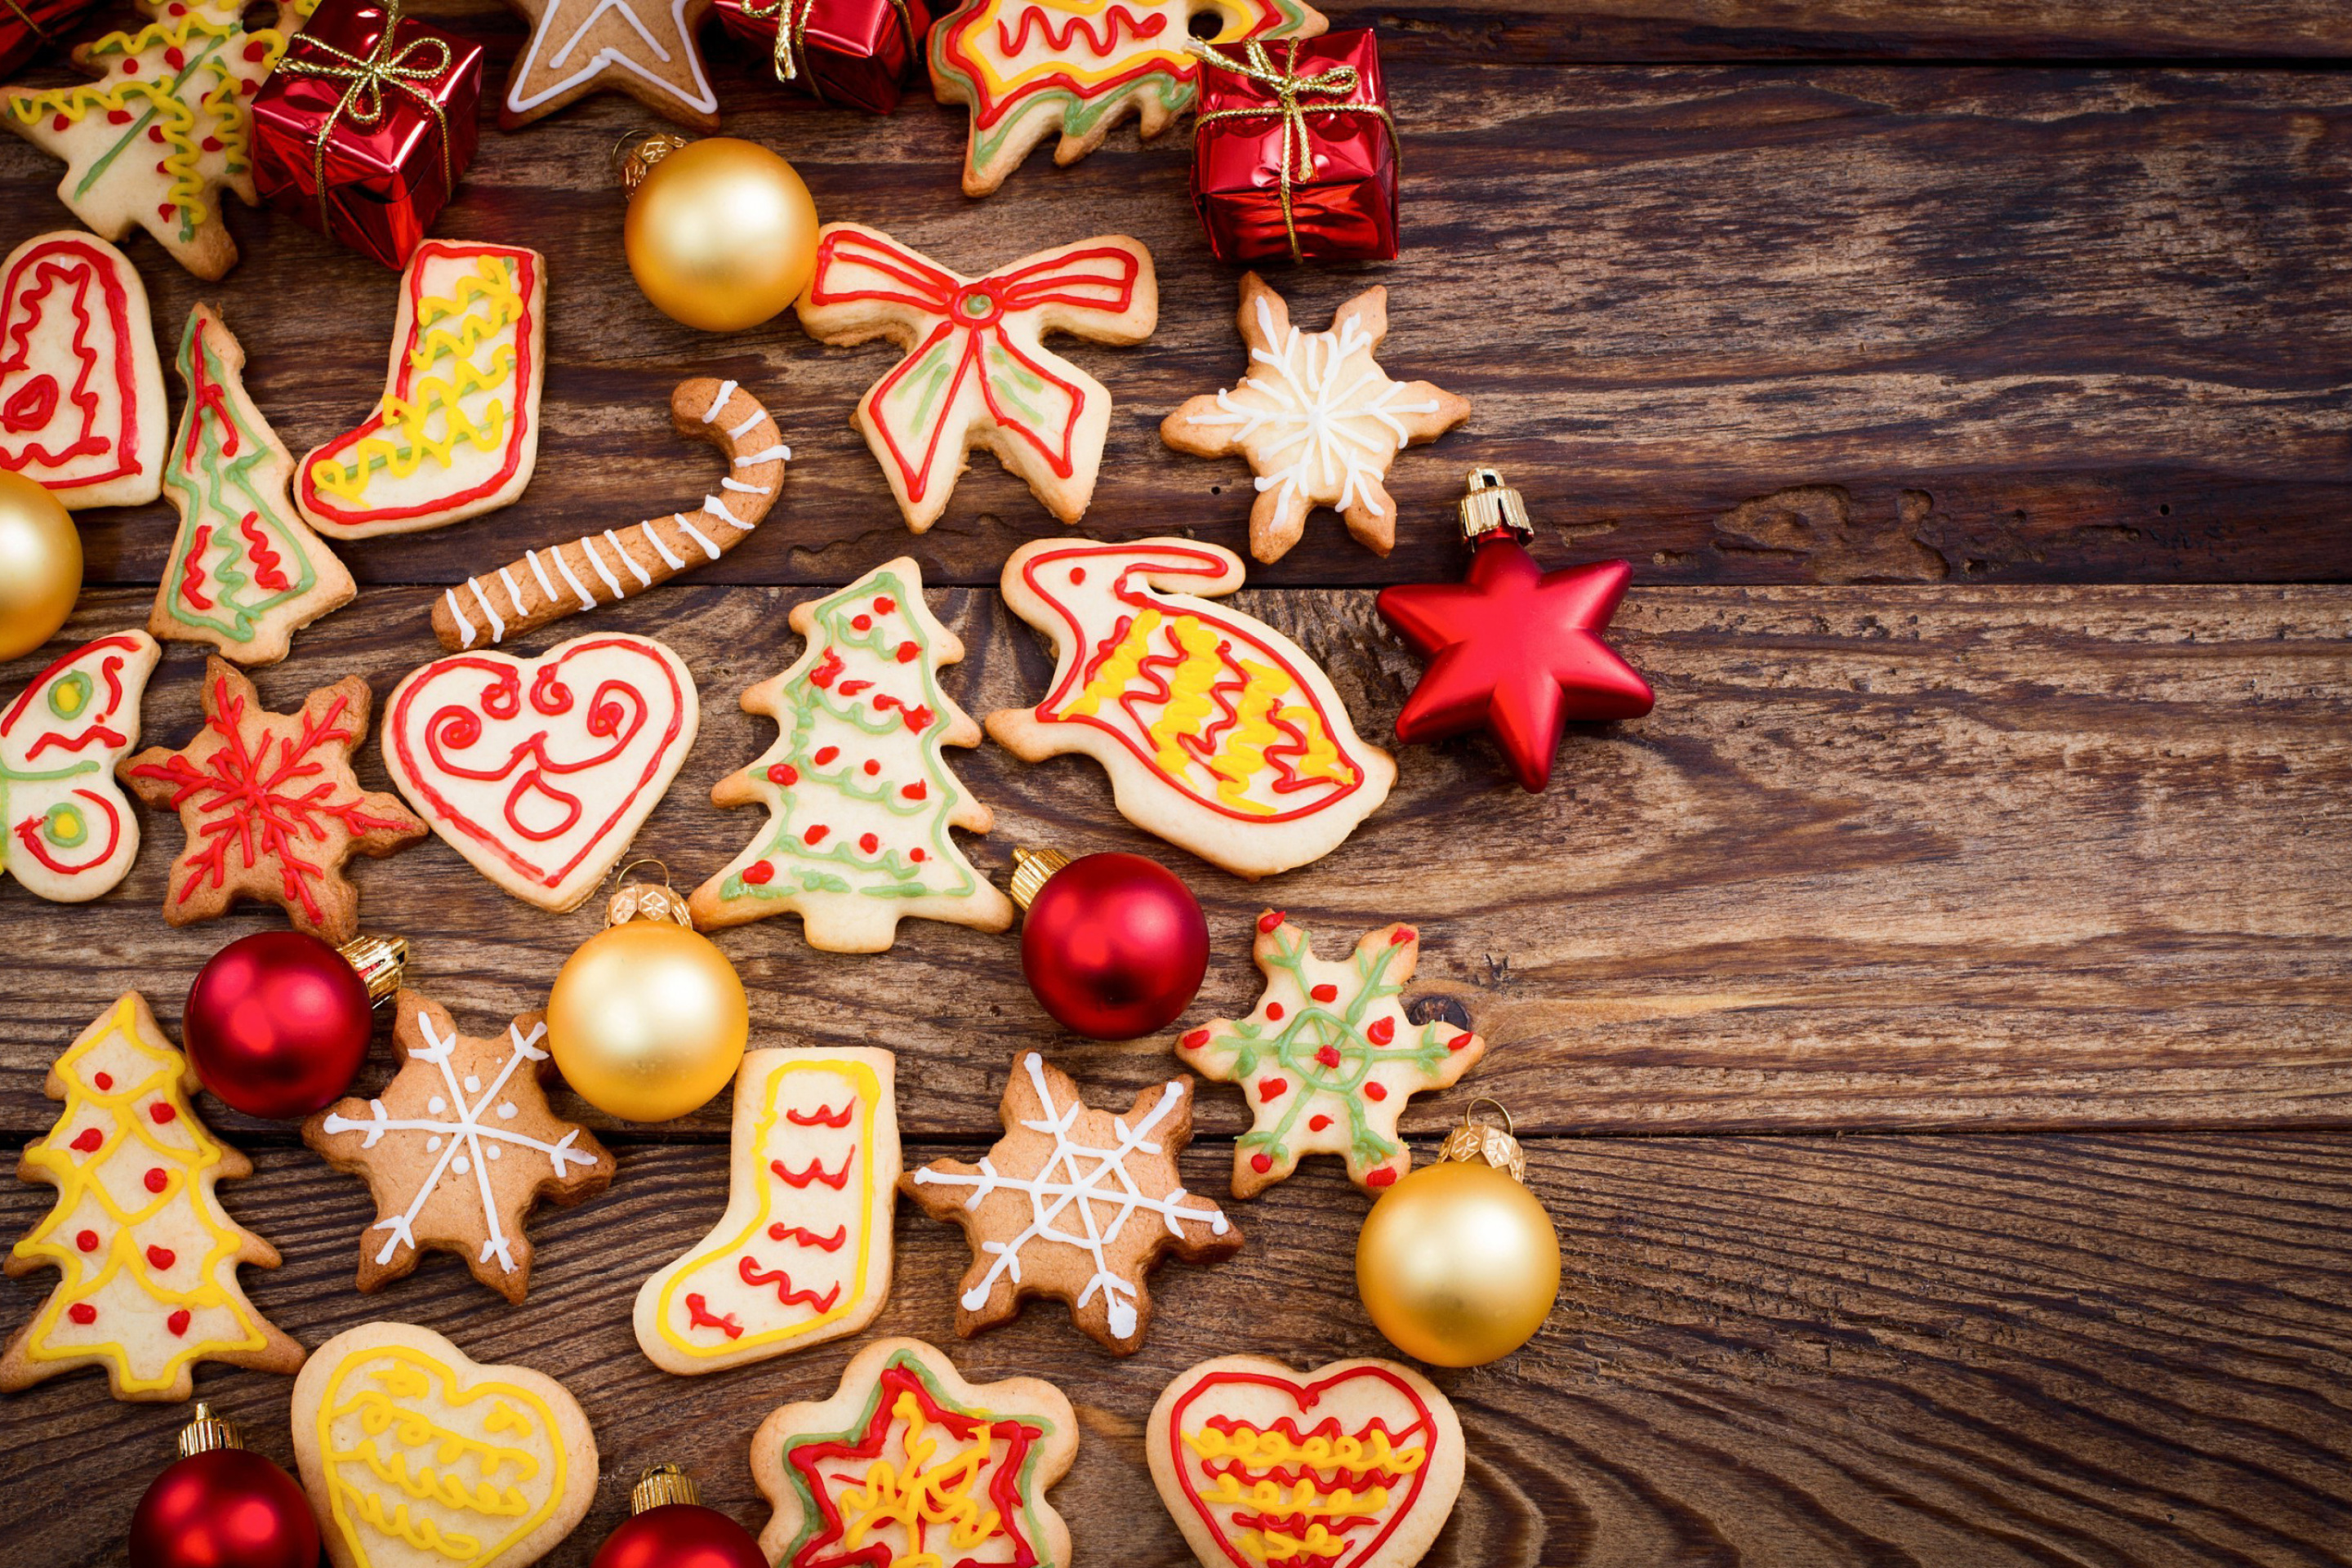 Das Christmas Decorations Cookies and Balls Wallpaper 2880x1920